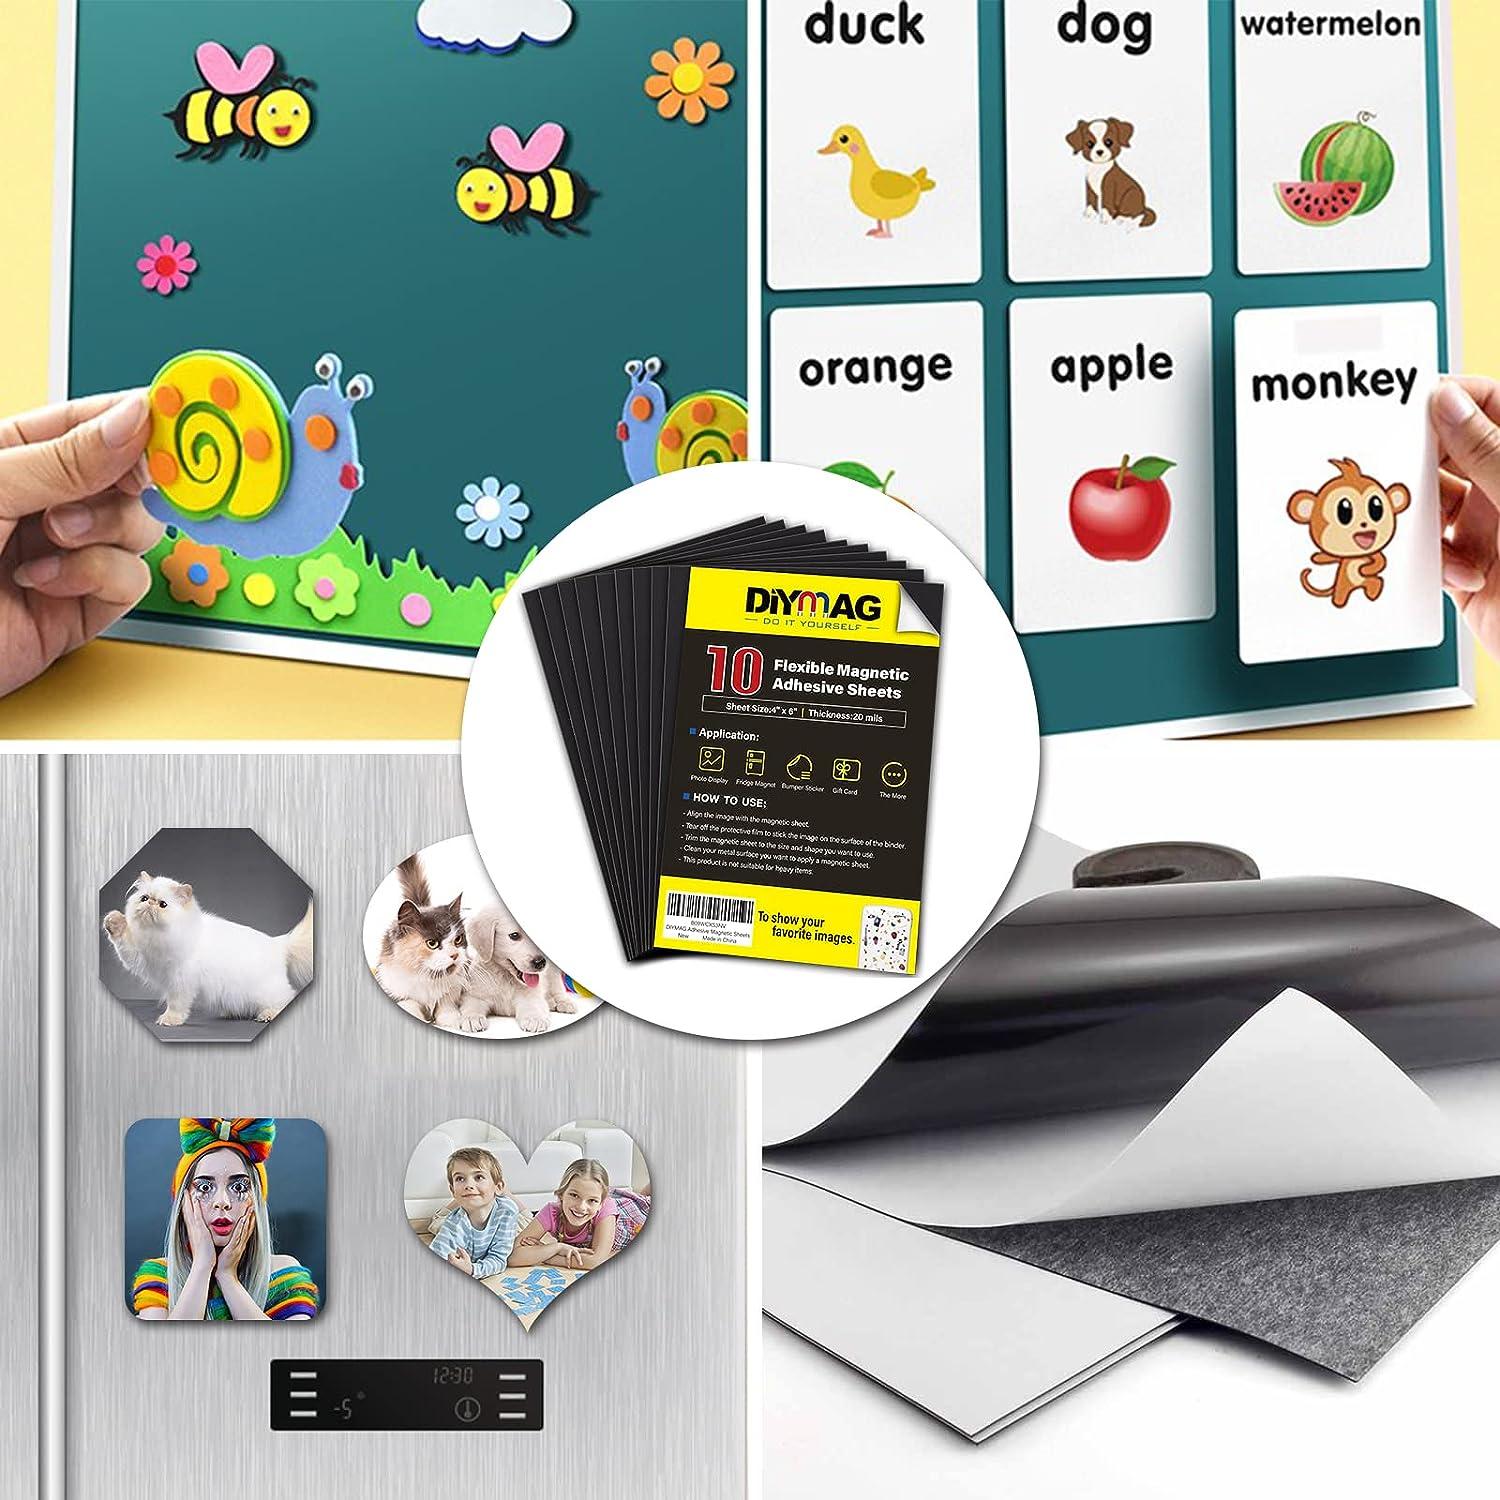 Flexible Magnets Self Adhesive Magnetic Sheets - Make Anything a Magnet -  Magnet